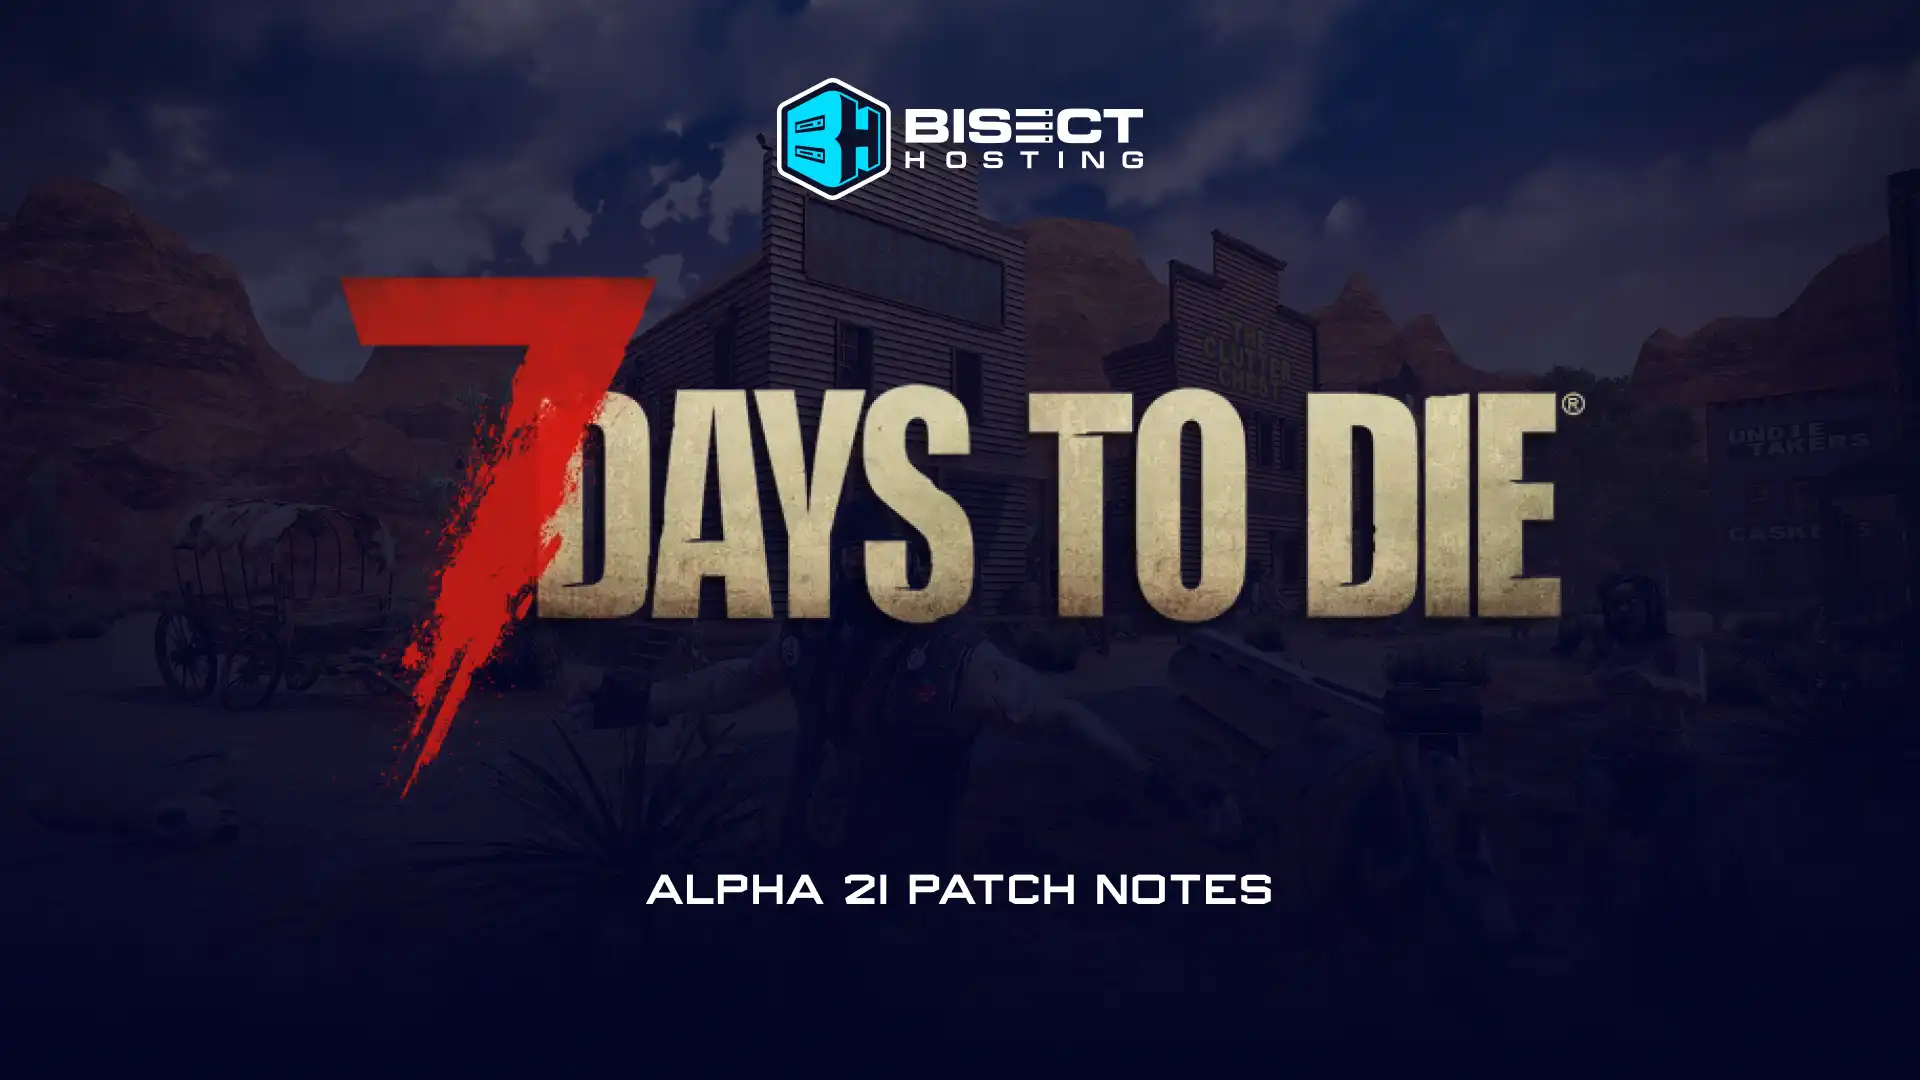 *LATEST* 7 Days to Die Alpha 21 Patch Notes REVEALED